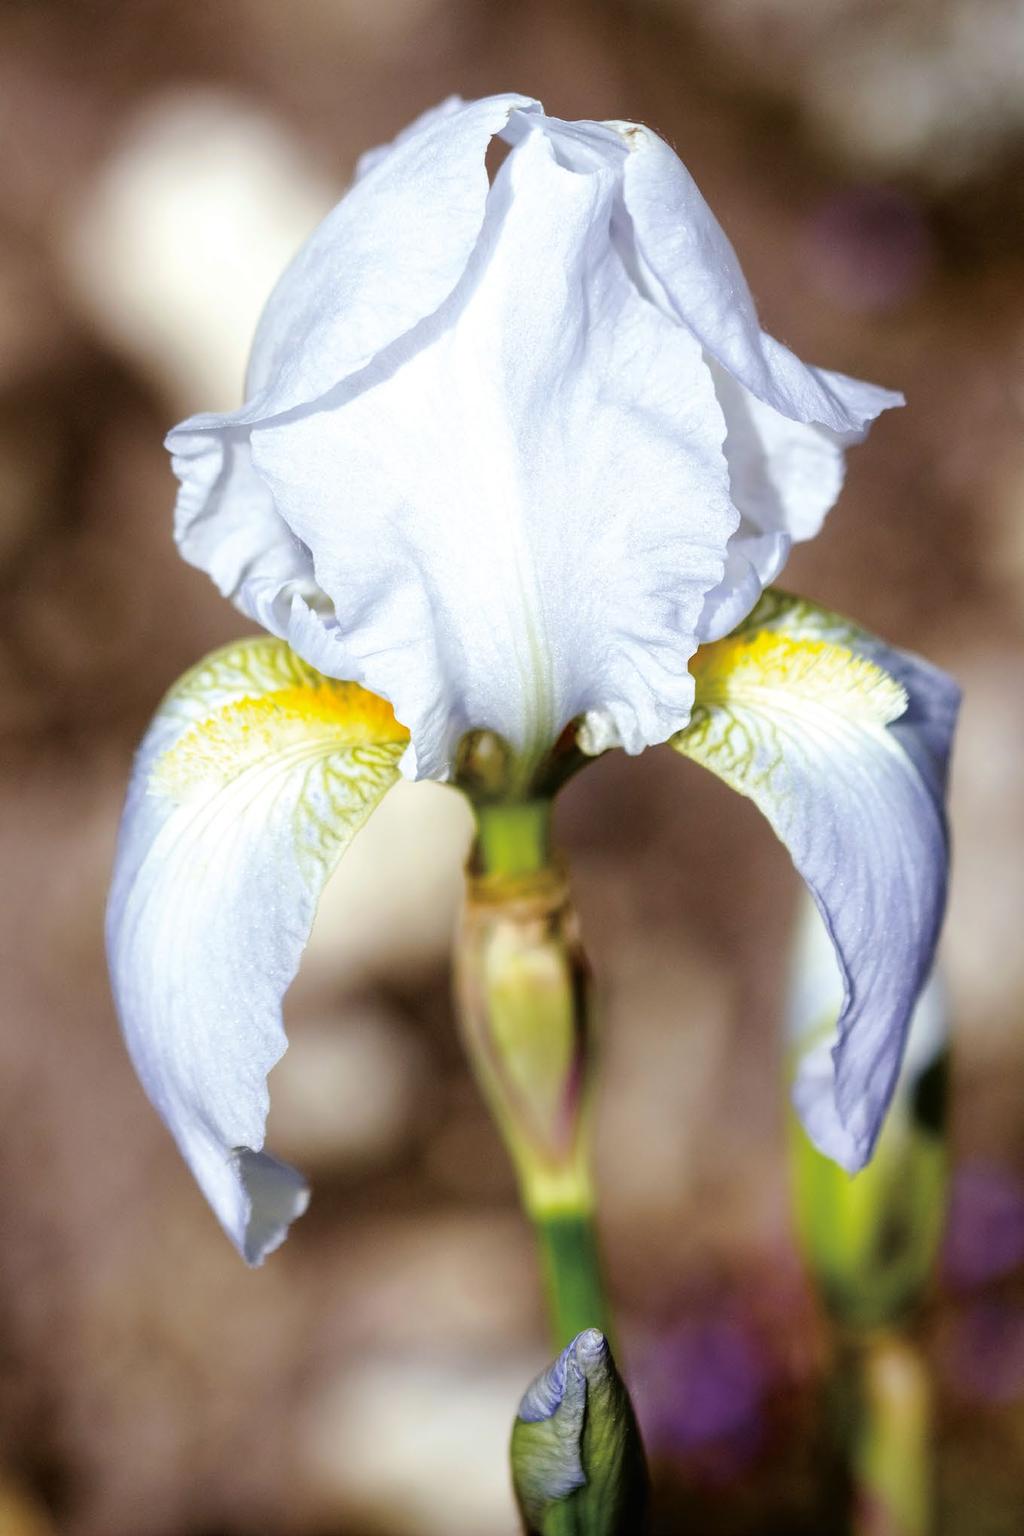 NAOLYS ACTIVE CELLS All Even Sweet iris Increasing skin density A STORY The sweet iris Iris pallida, Iridaceae A plant with a sacred fragrance As a sun plant, the sweet Iris grows naturally in South